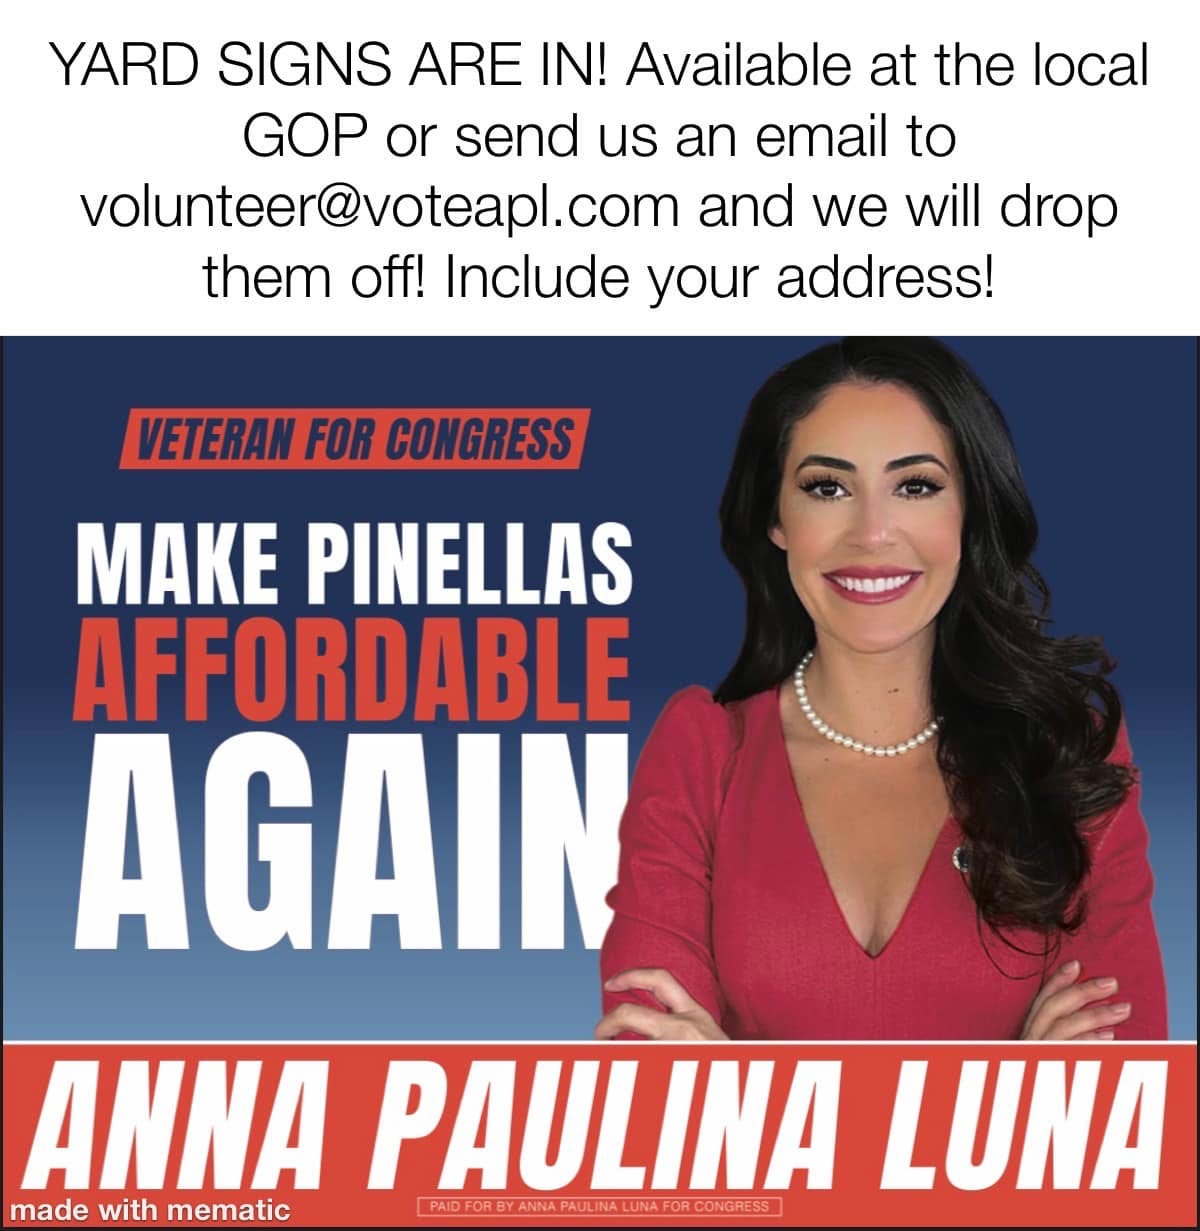 May be an image of 1 person and text that says 'YARD SIGNS ARE IN! Available at the local GOP or send us an email to volunteer@voteapl.com and we will drop them off! Include your address! VETERAN FOR CONGRESS MAKE PINELLAS AFFORDABLE AGAIN ANNA PAULINA LUNA made with mematic Û'